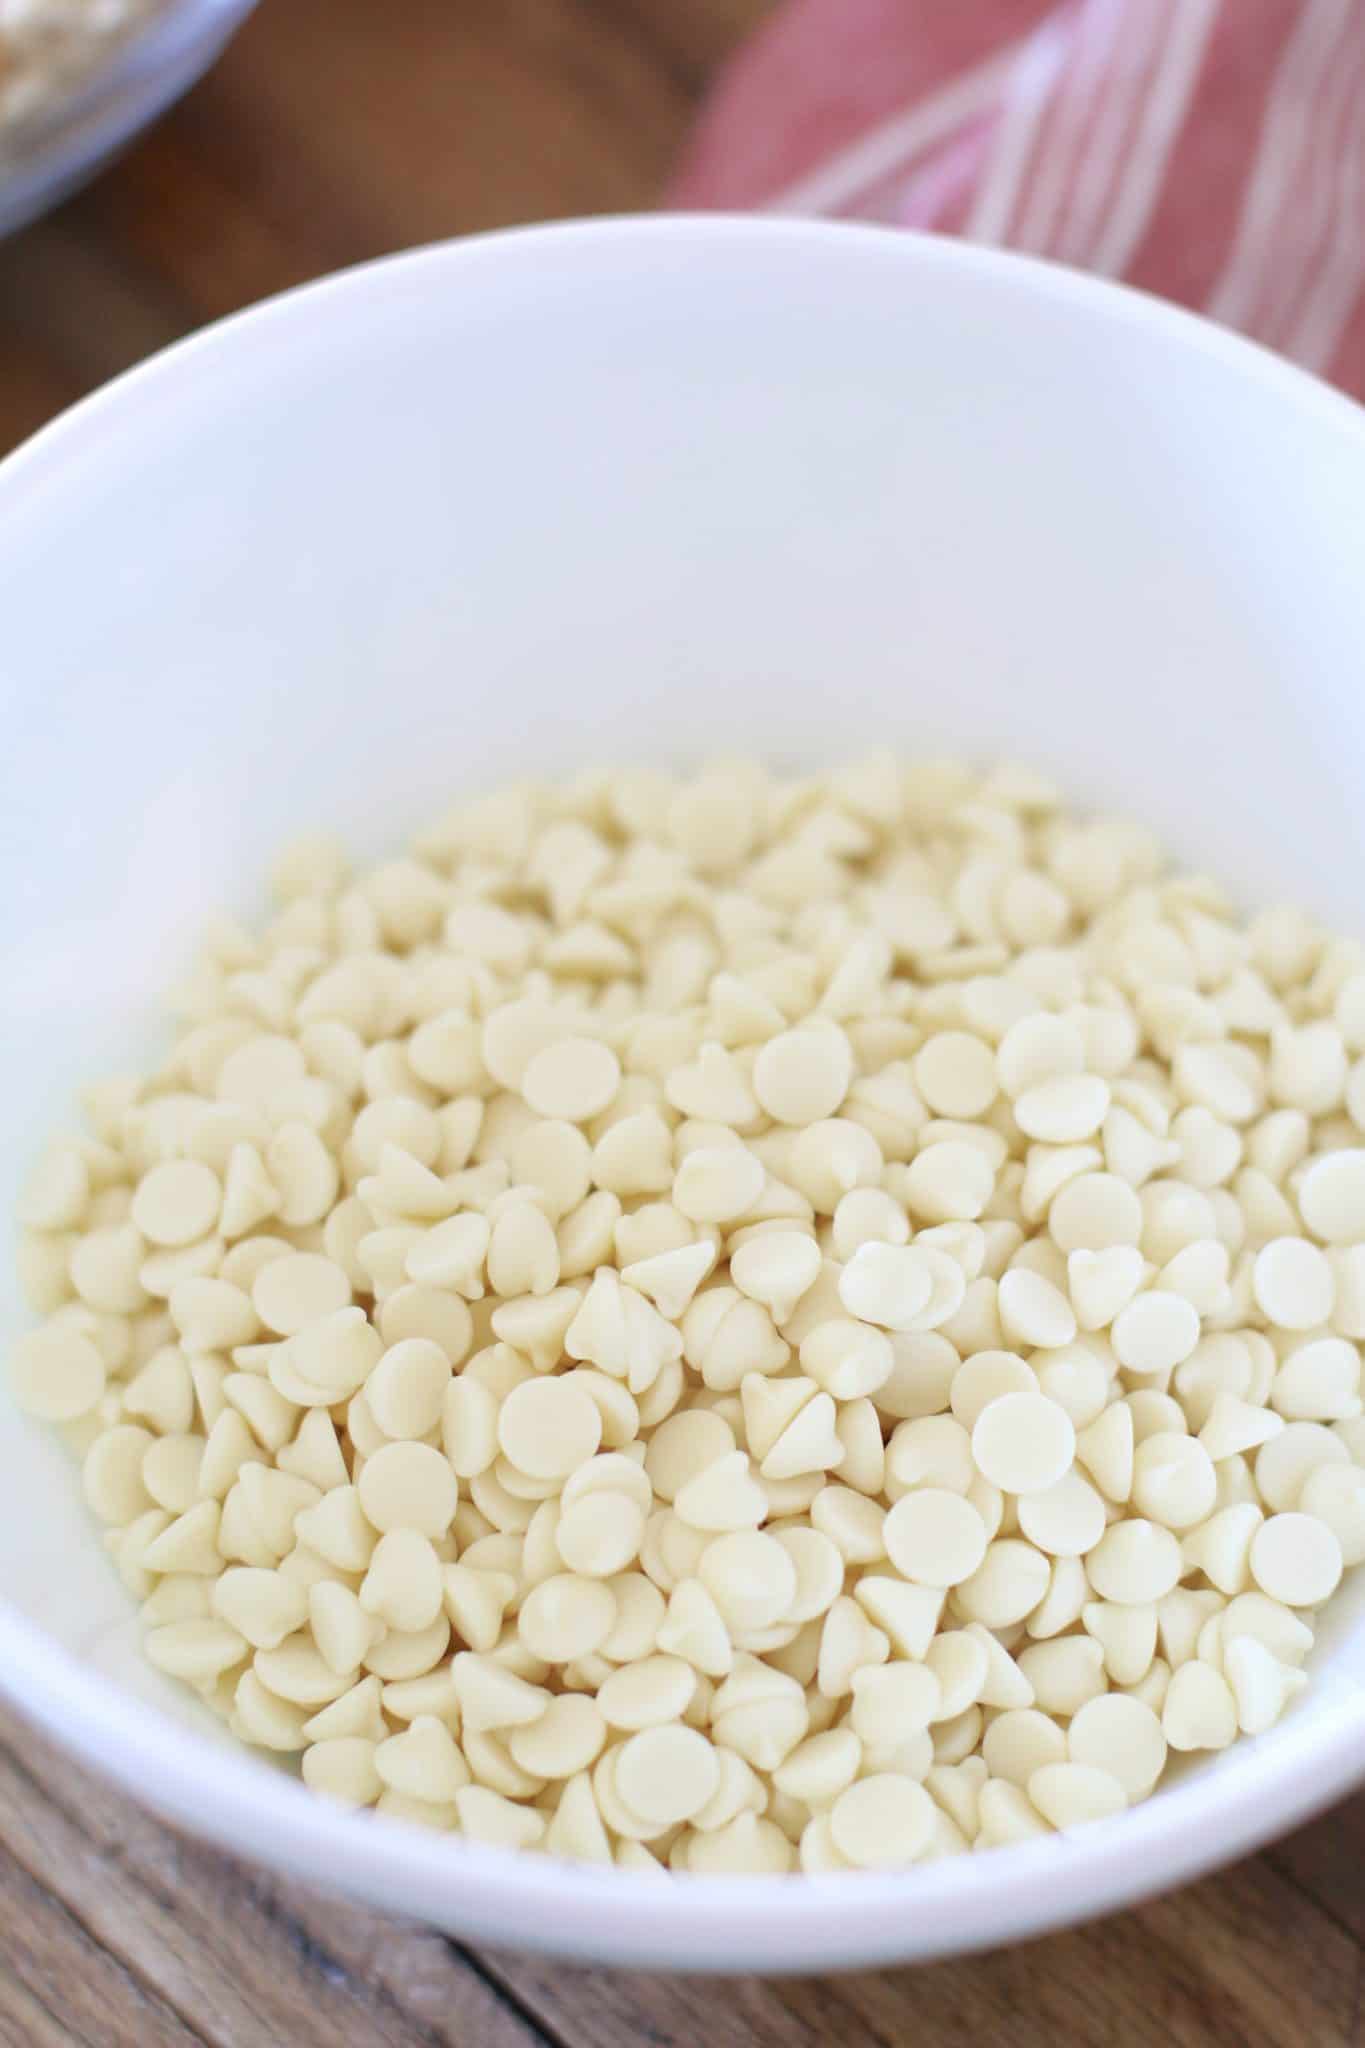 white chocolate chips in a bowl.